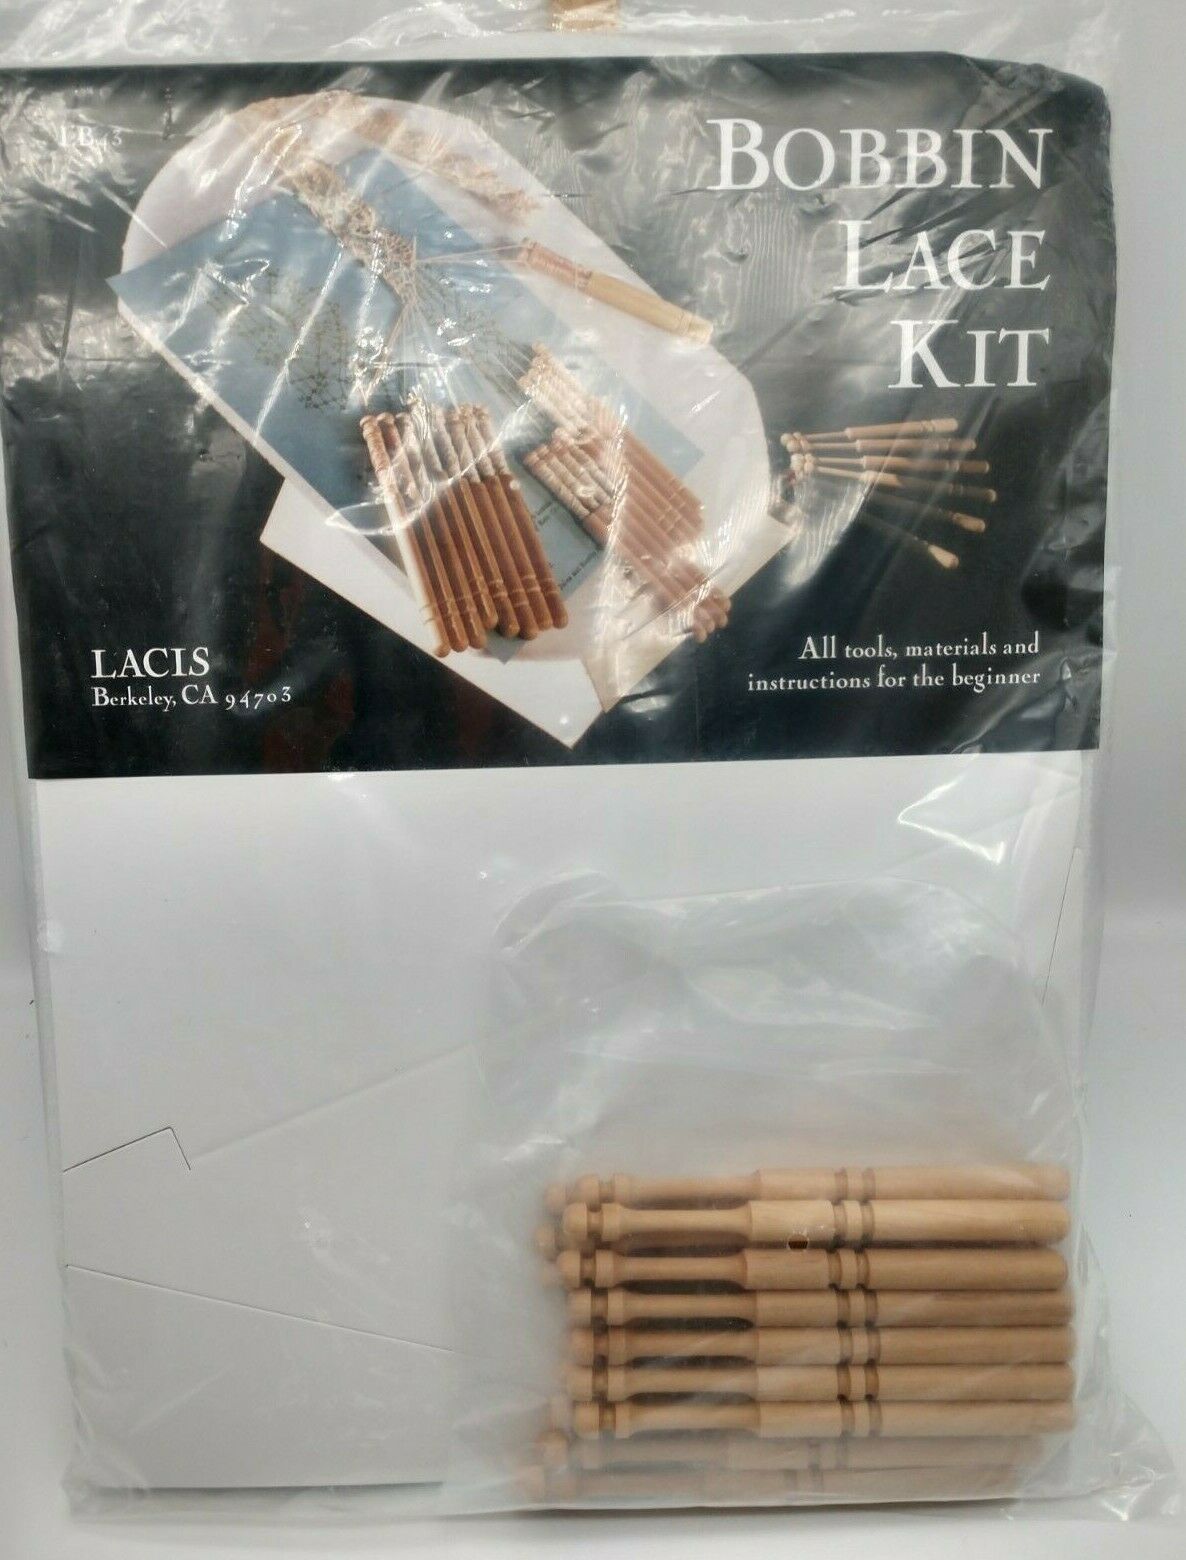 Lacis Bobbin Lace Kit Unopened Bag Tools Materials And Instruction For Beginners